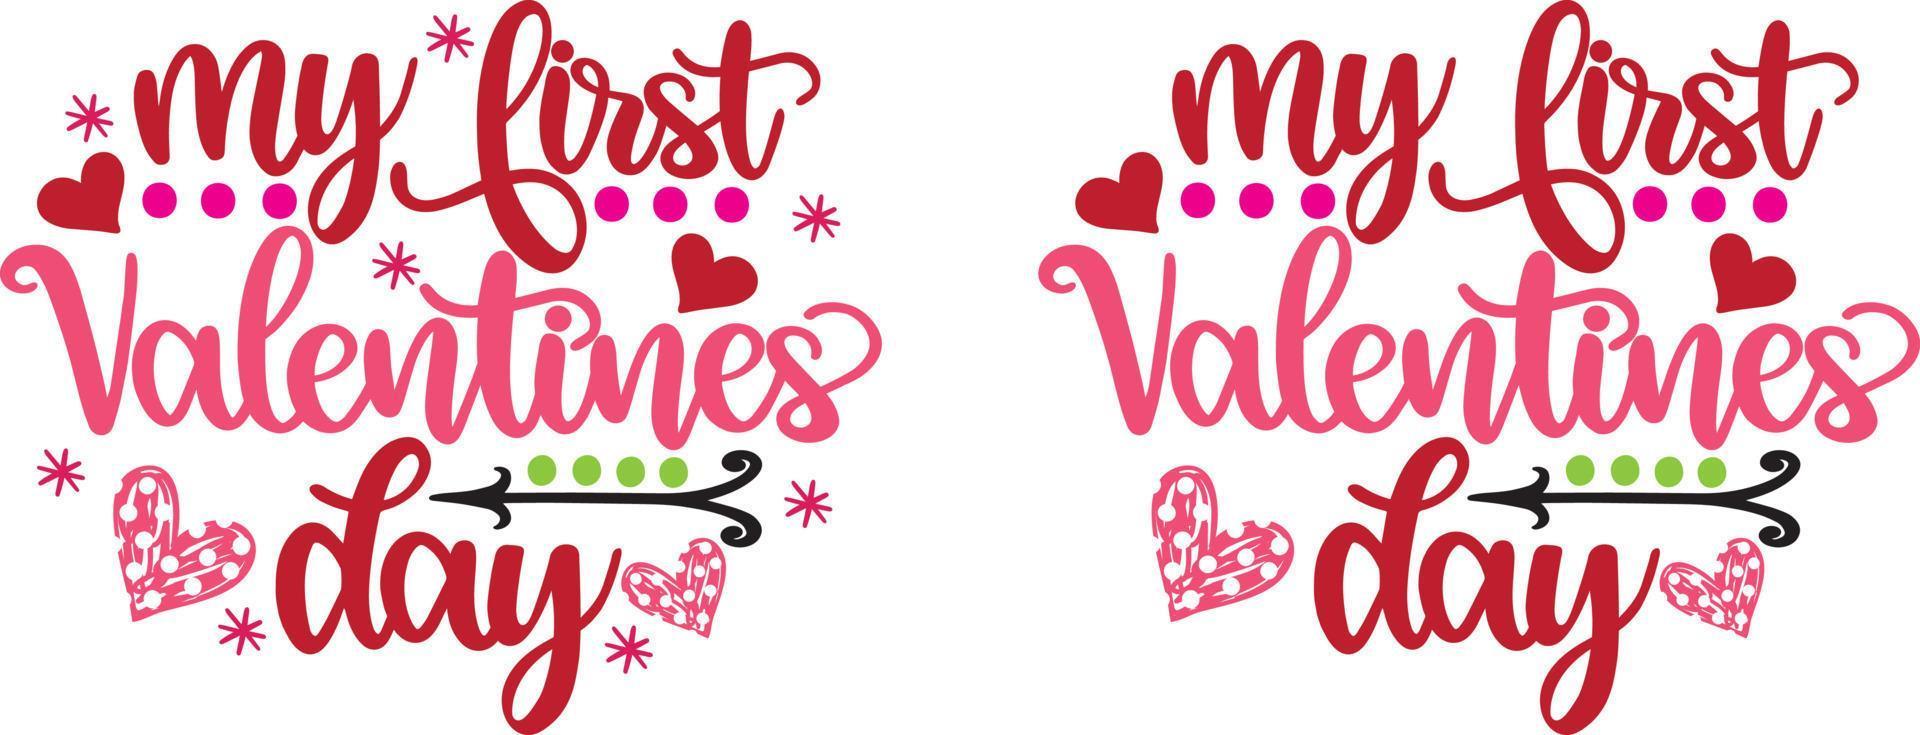 My First Valentines Day, Heart, Love, Valentines Day, Be Mine, Holiday, Vector Illustration Files